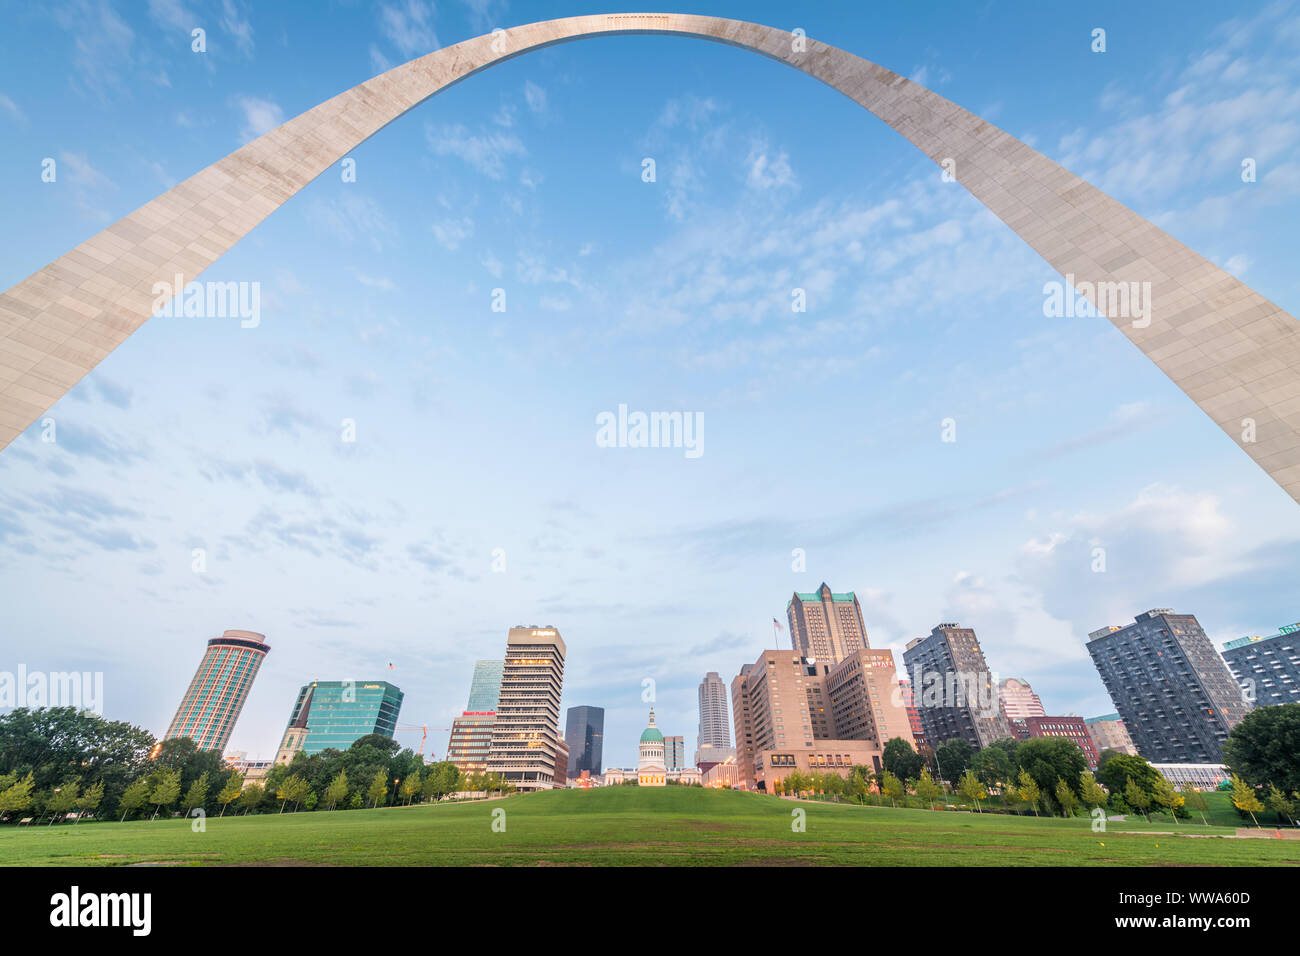 St. Louis, Missouri, USA city skyline and park in the morning. Stock Photo